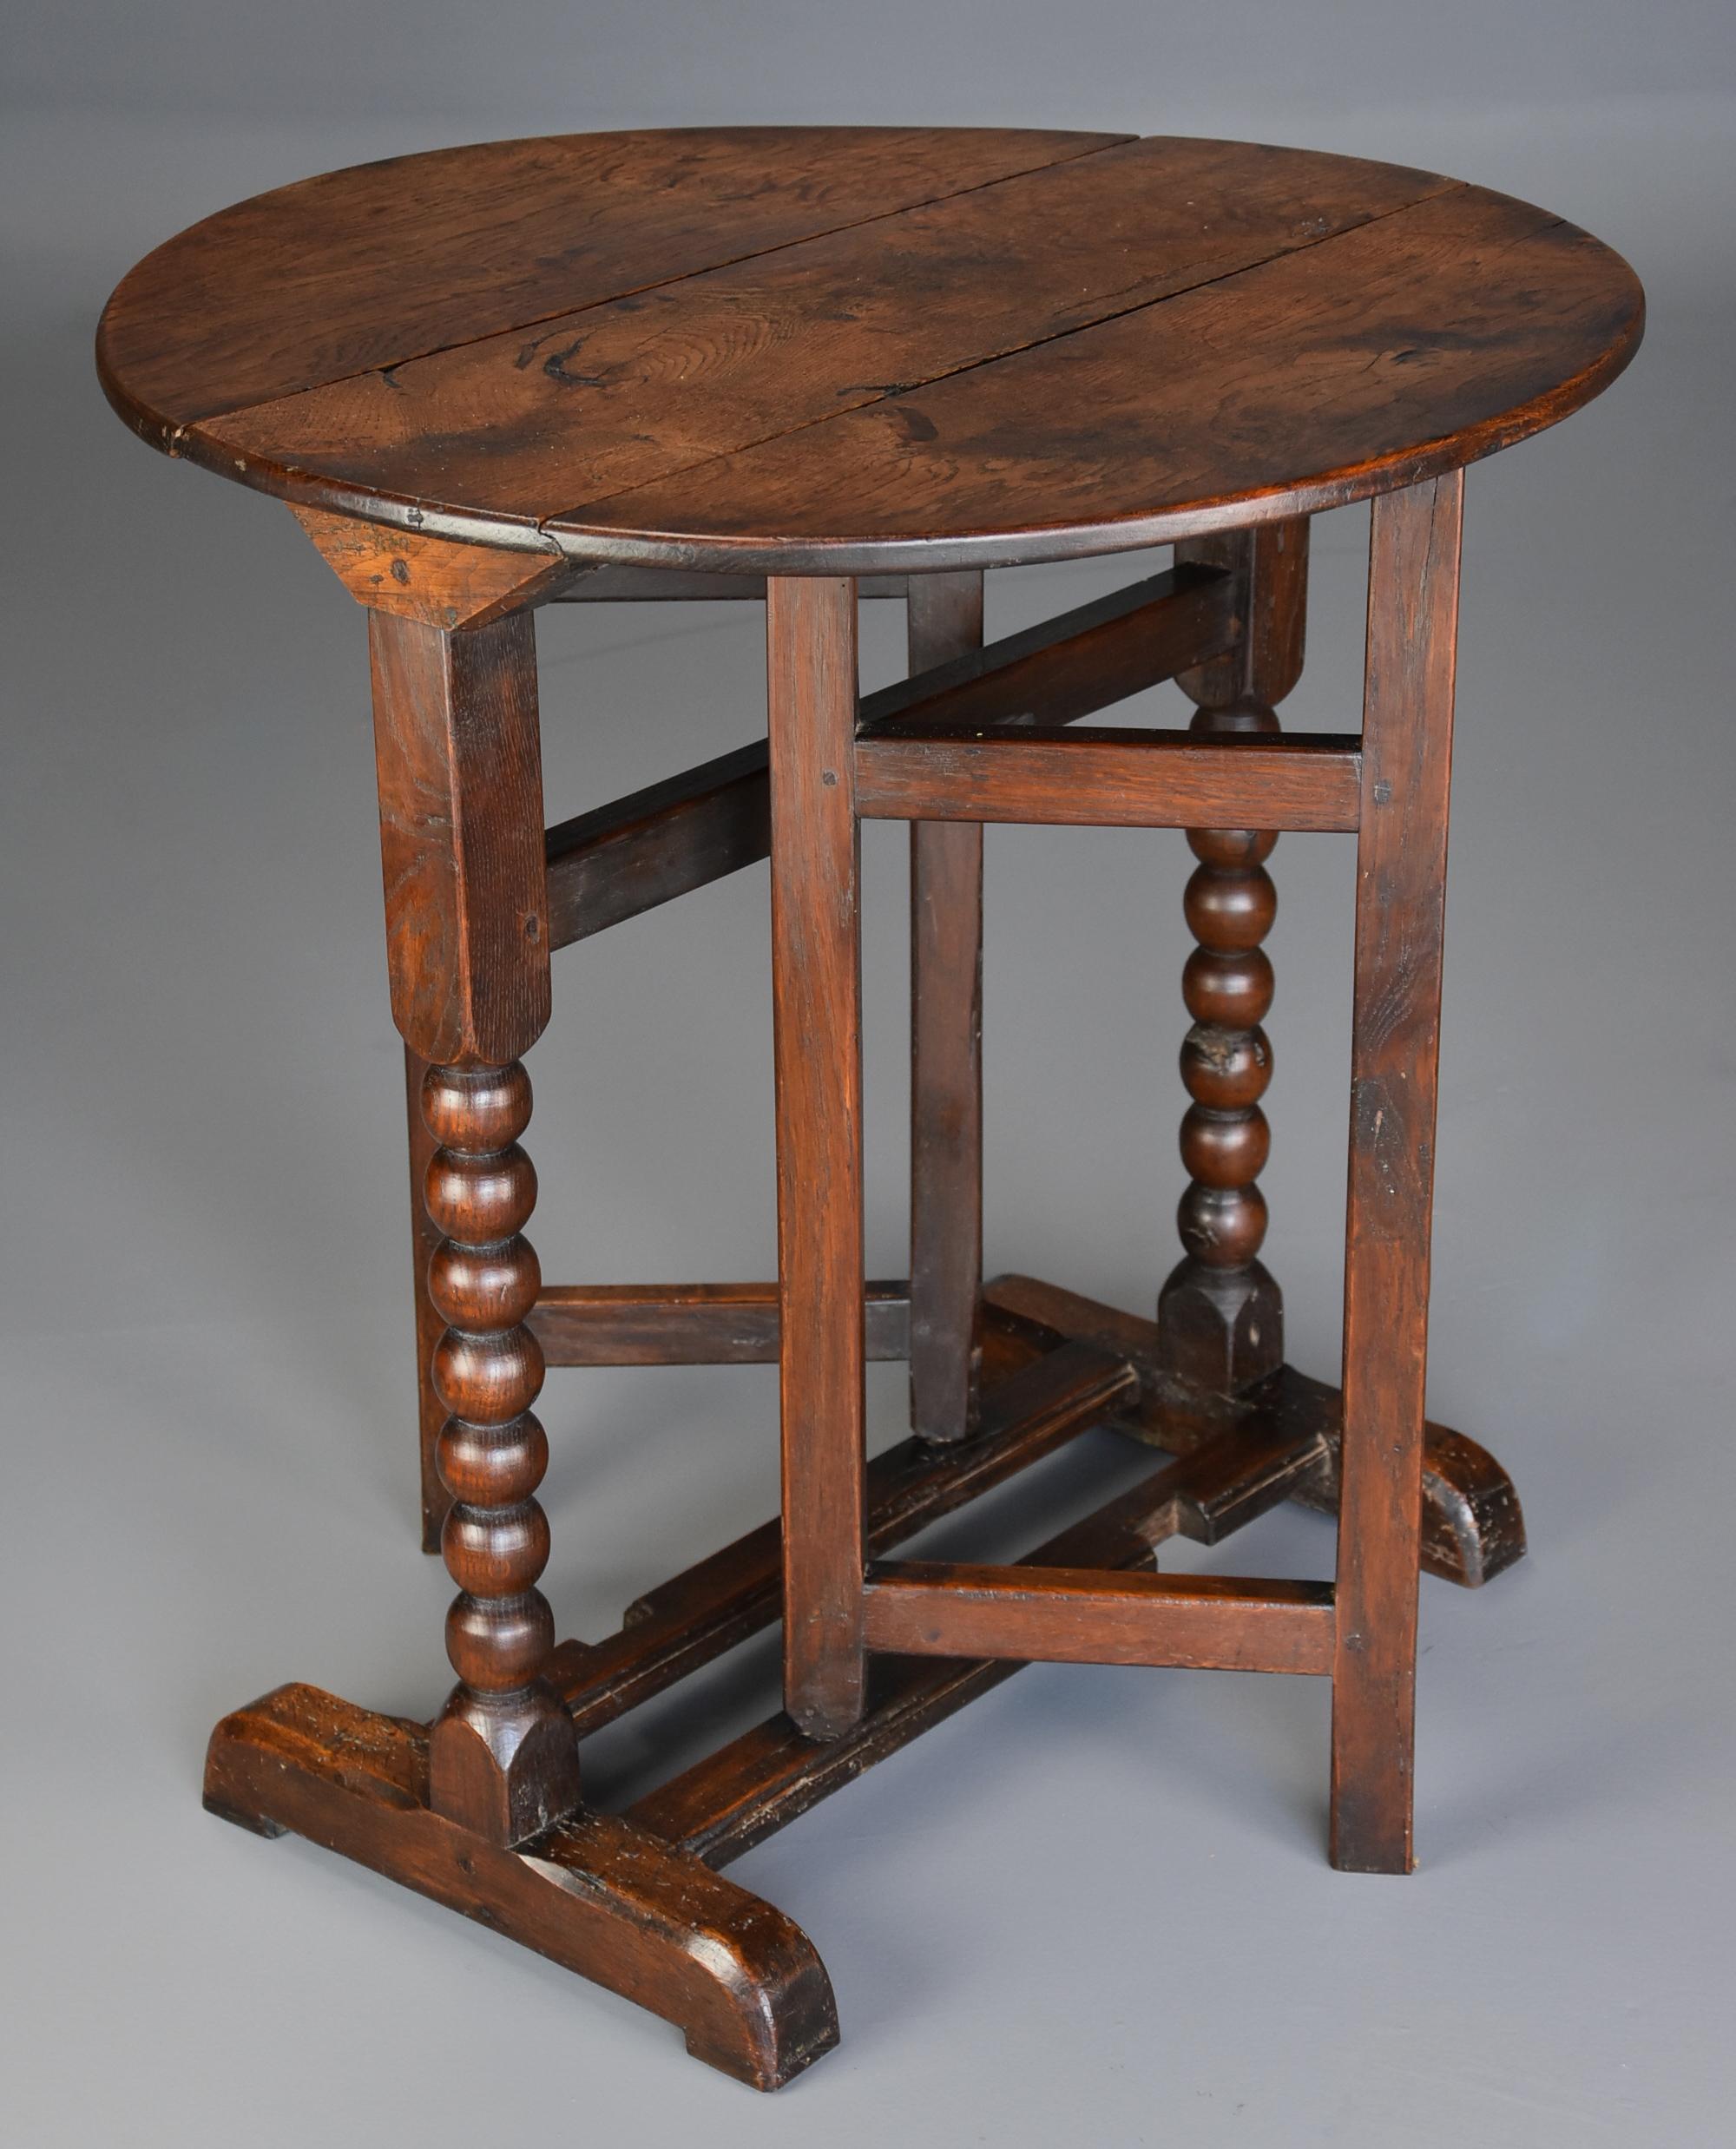 An extremely rare late 17th century (circa 1680) oak joined gateleg table of small proportions with superb patina (color) from the William & Mary period.

This table consists of a solid oak top of excellent patina leading down to an oak base with